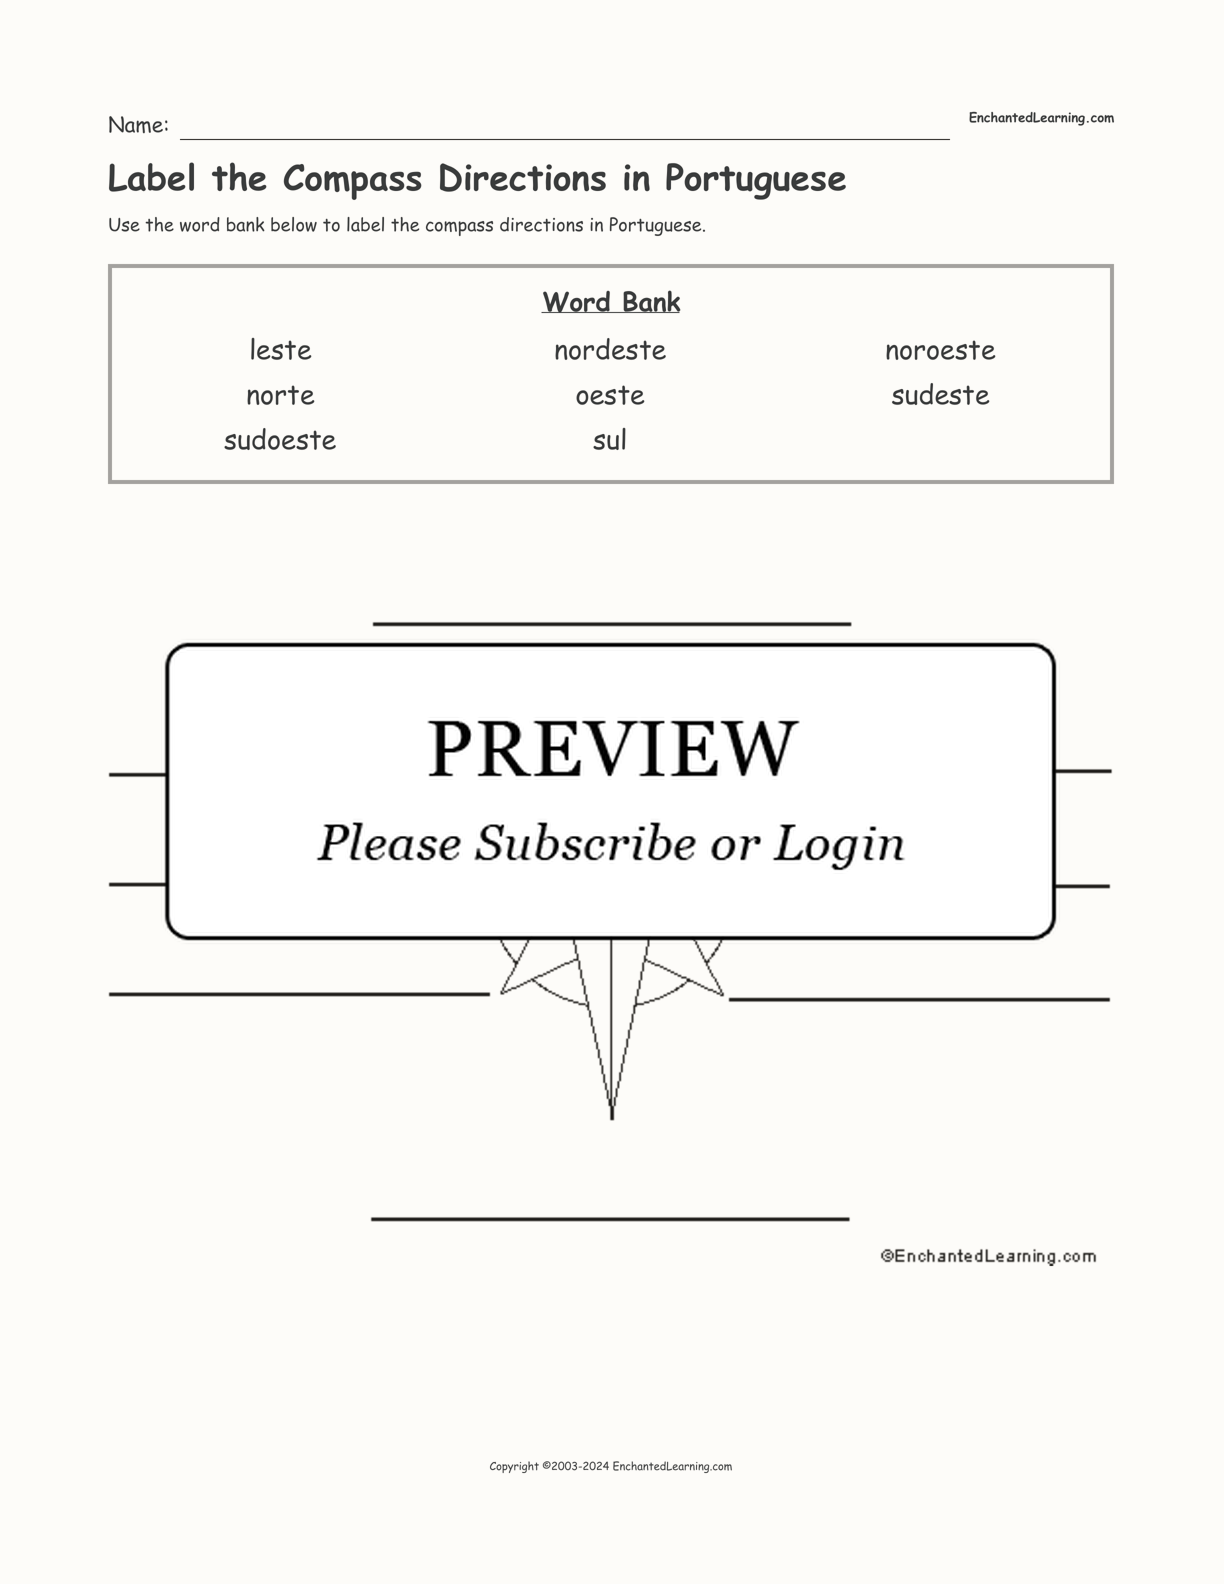 Label the Compass Directions in Portuguese interactive worksheet page 1